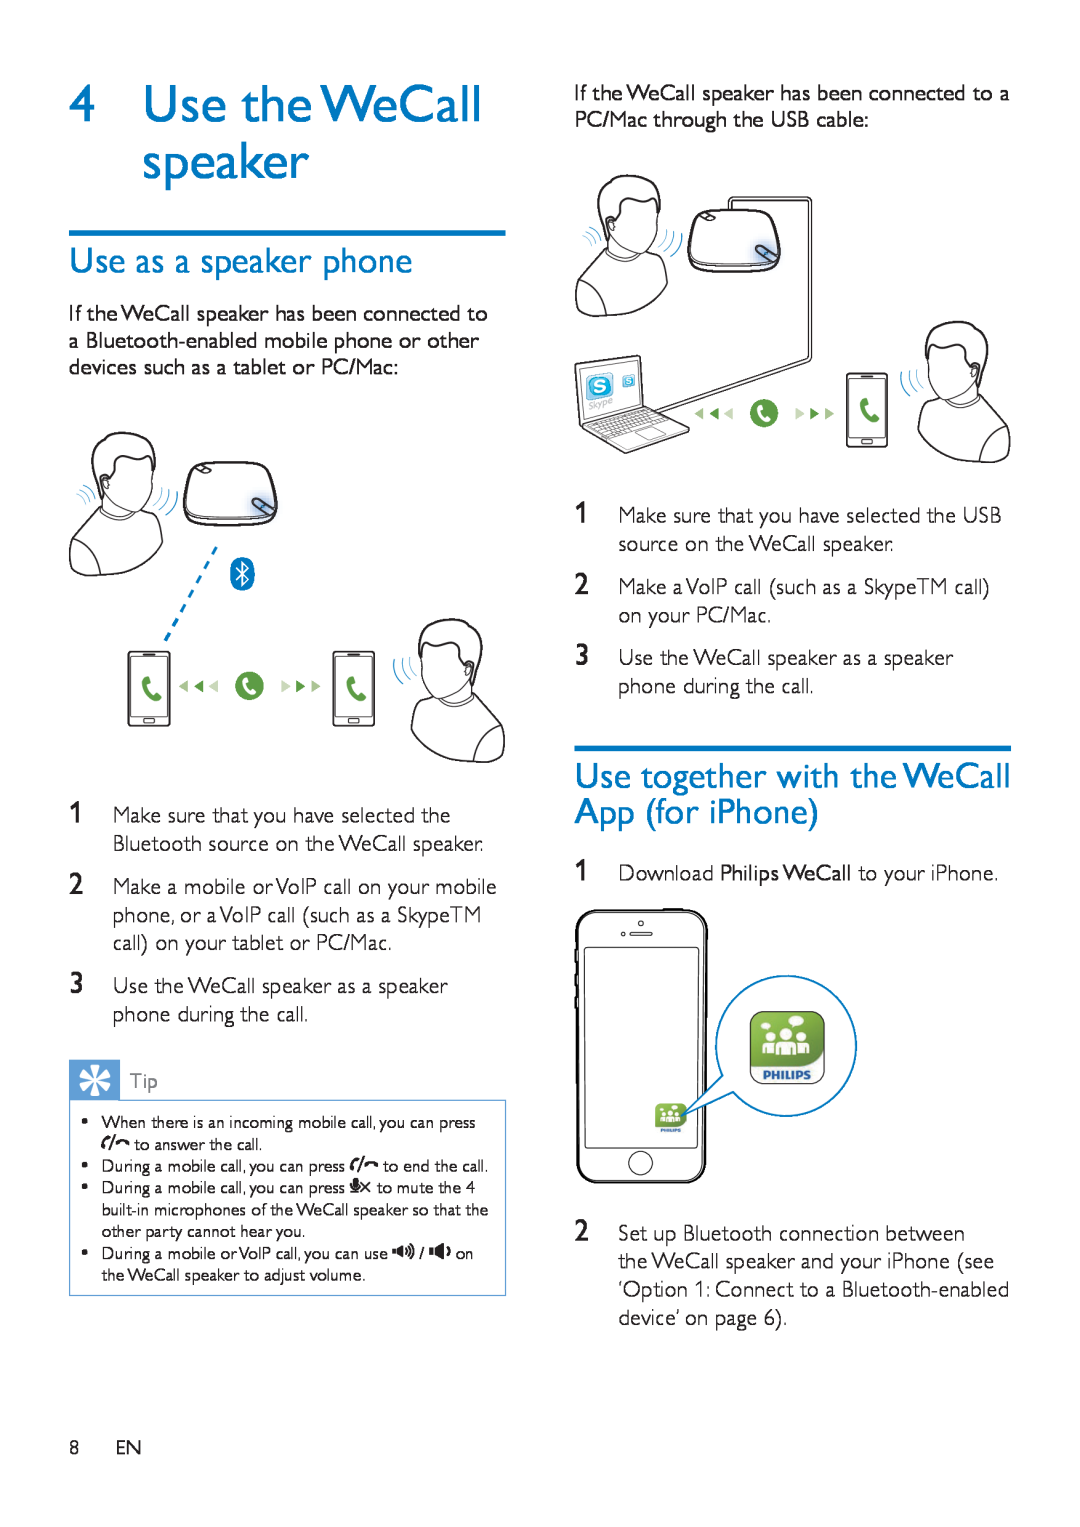 Philips AECS7000 user manual 4Use the WeCall speaker, Use as a speaker phone, Use together with the WeCall App for iPhone 